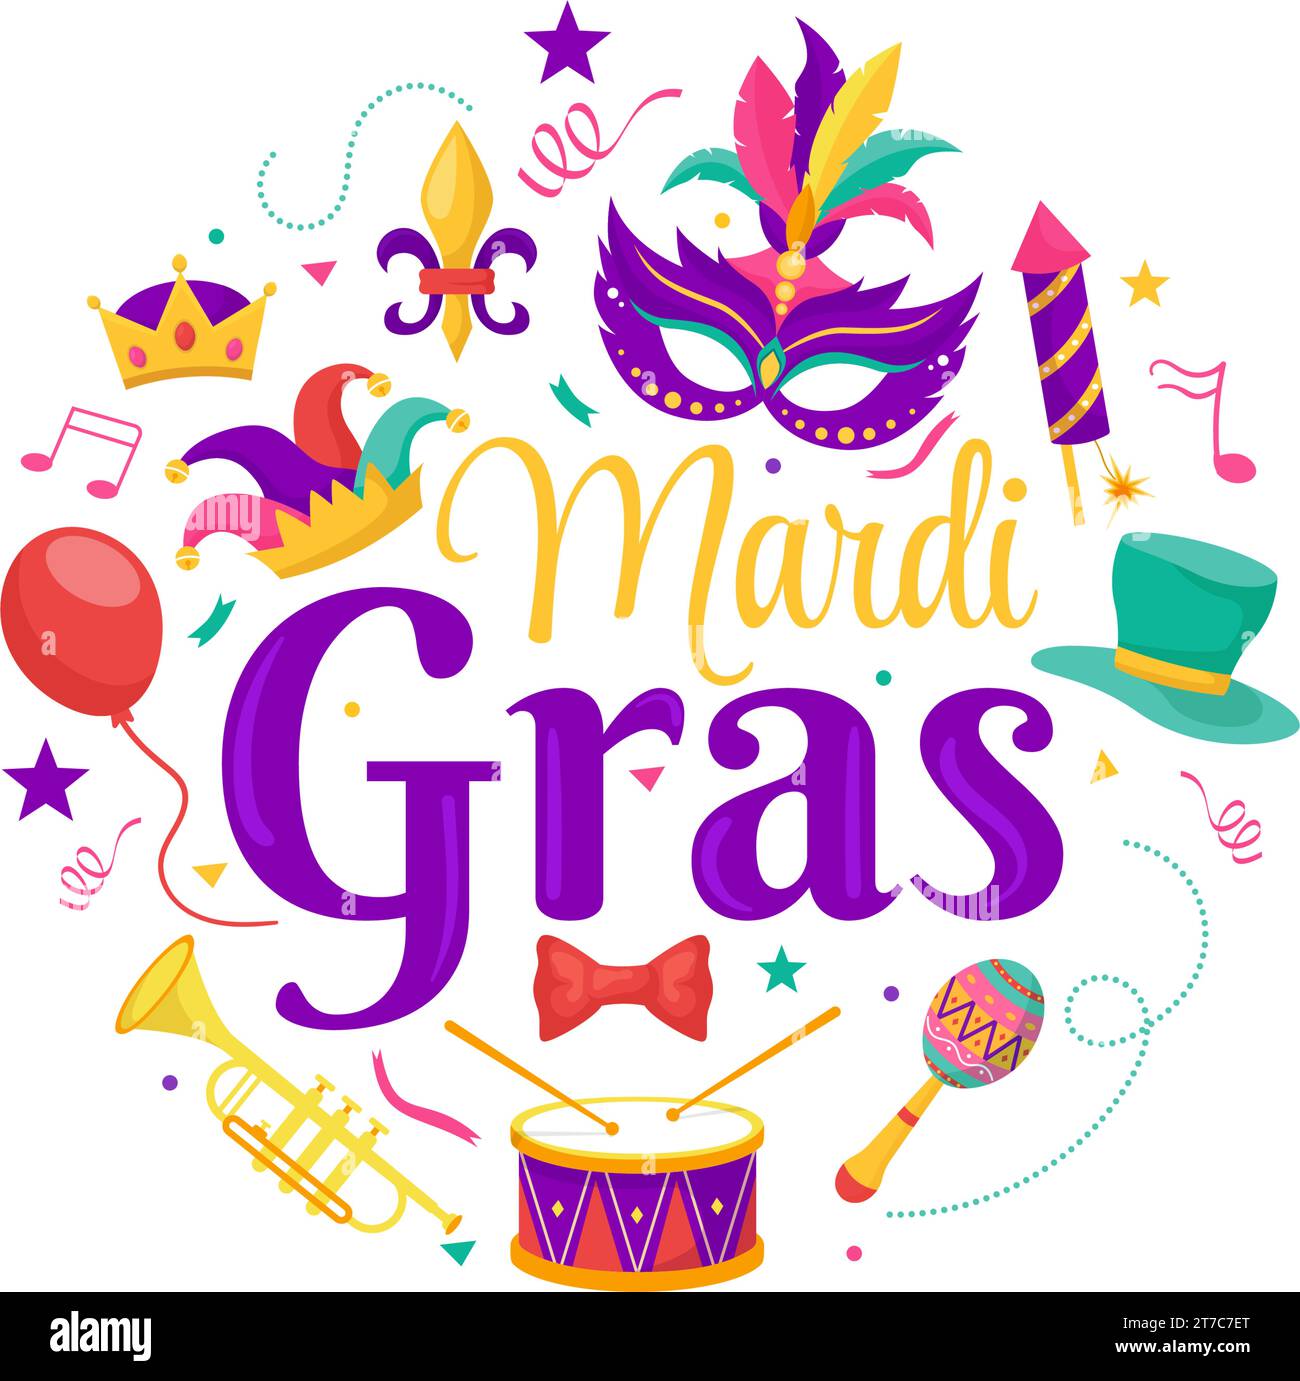 Mardi Gras Carnival Vector Illustration. Translation is French for Fat Tuesday. Festival with Masks, Maracas, Guitar and Feathers on Purple Background Stock Vector